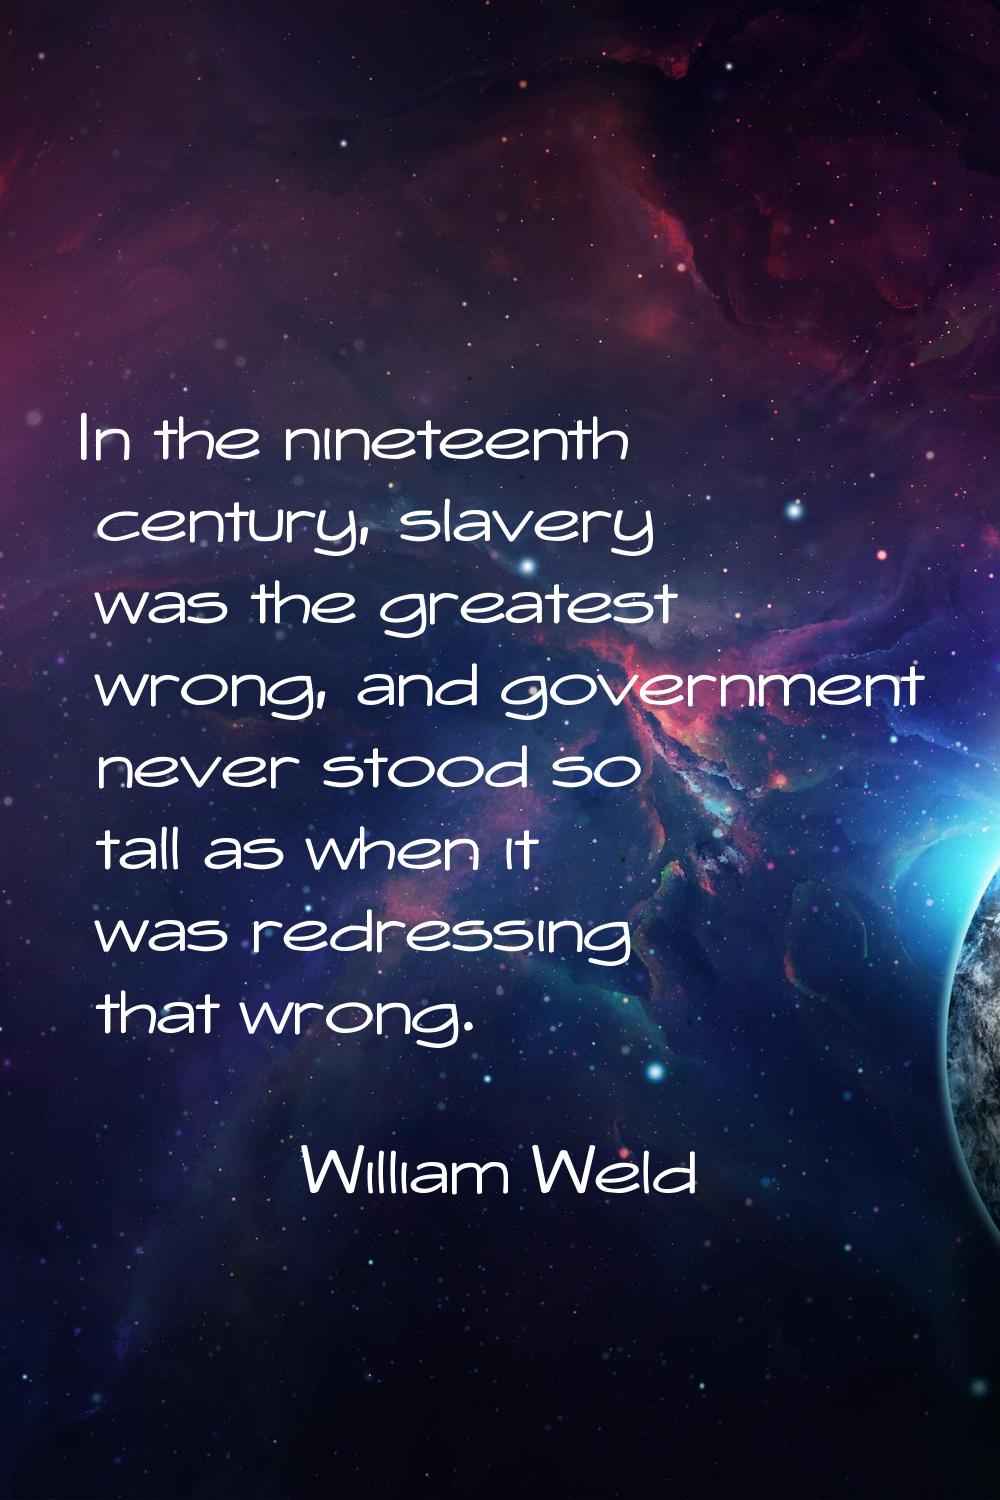 In the nineteenth century, slavery was the greatest wrong, and government never stood so tall as wh